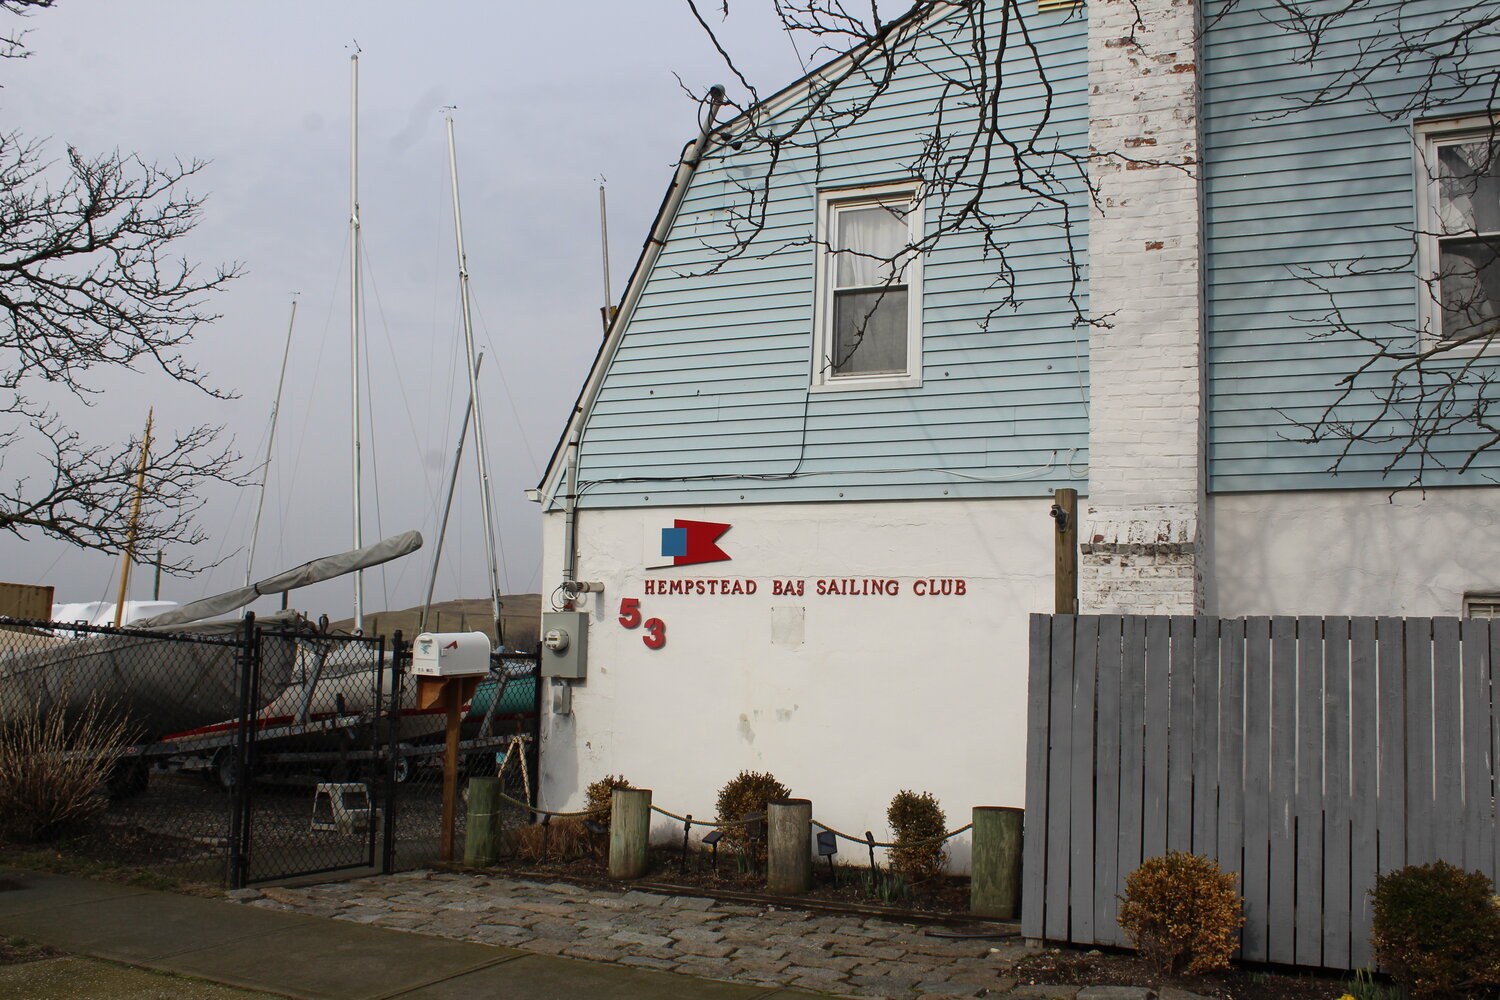 The Hempstead Bay Sailing Club marina and clubhouse is located on 53 Empire Blvd. in Island Park behind Peter’s Clam Bar.